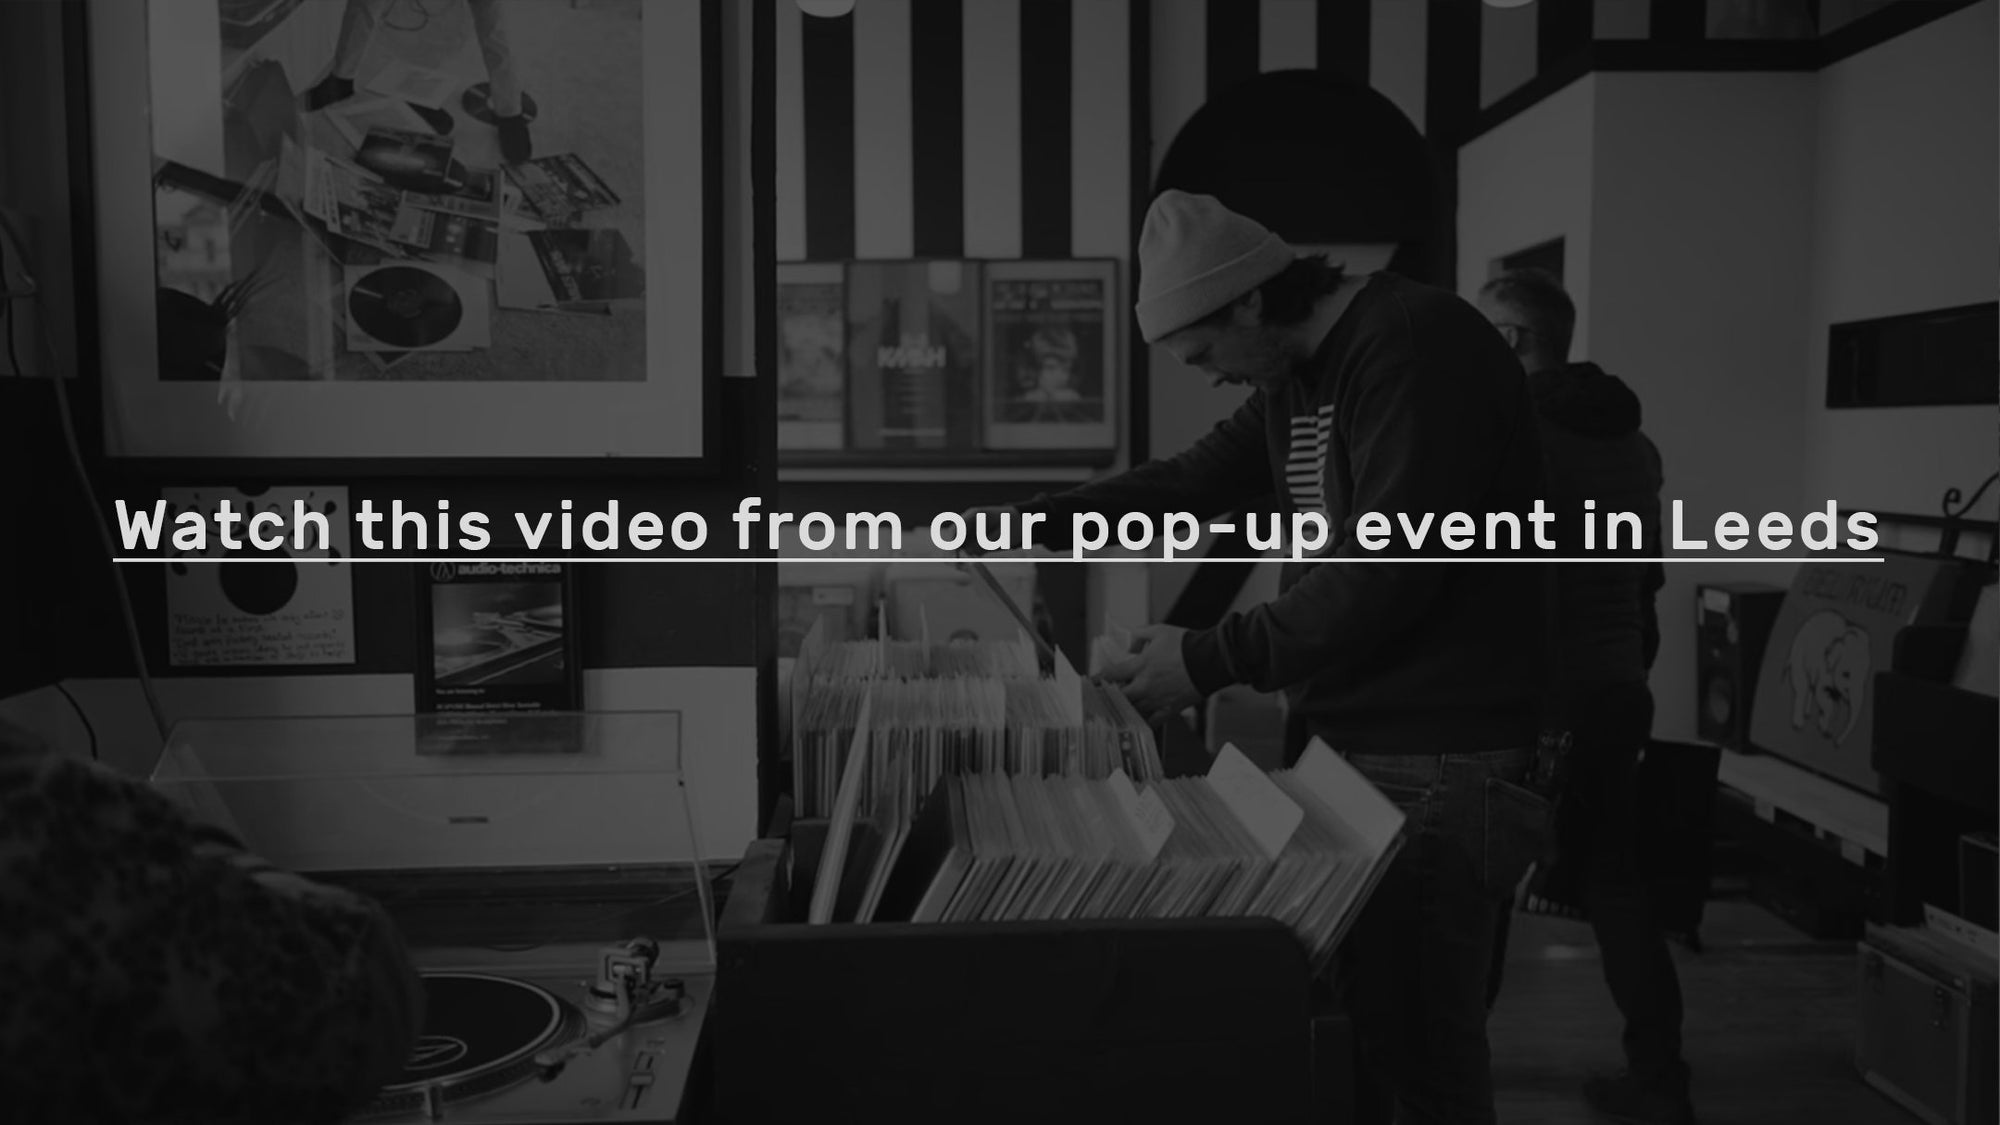 Have a look at what happened during our pop-up event in Leeds - MasterSounds